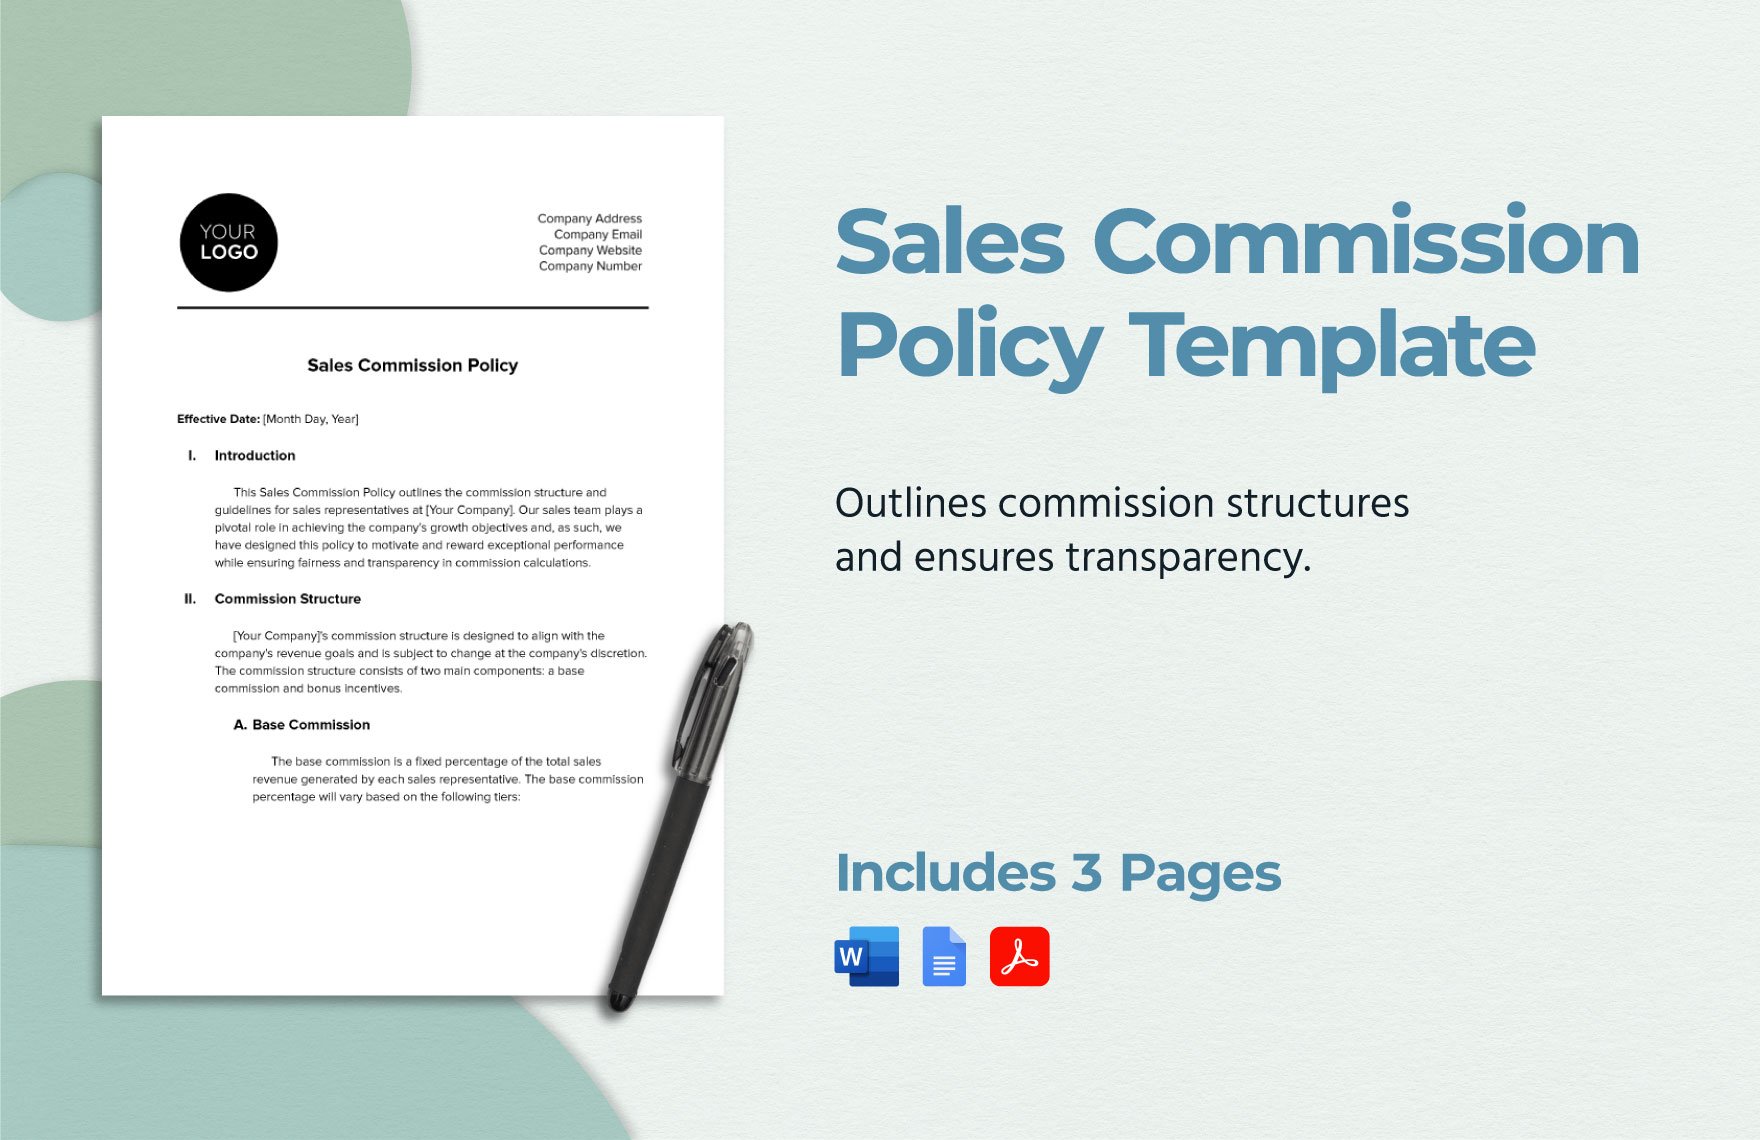 Sales Commission Policy Template